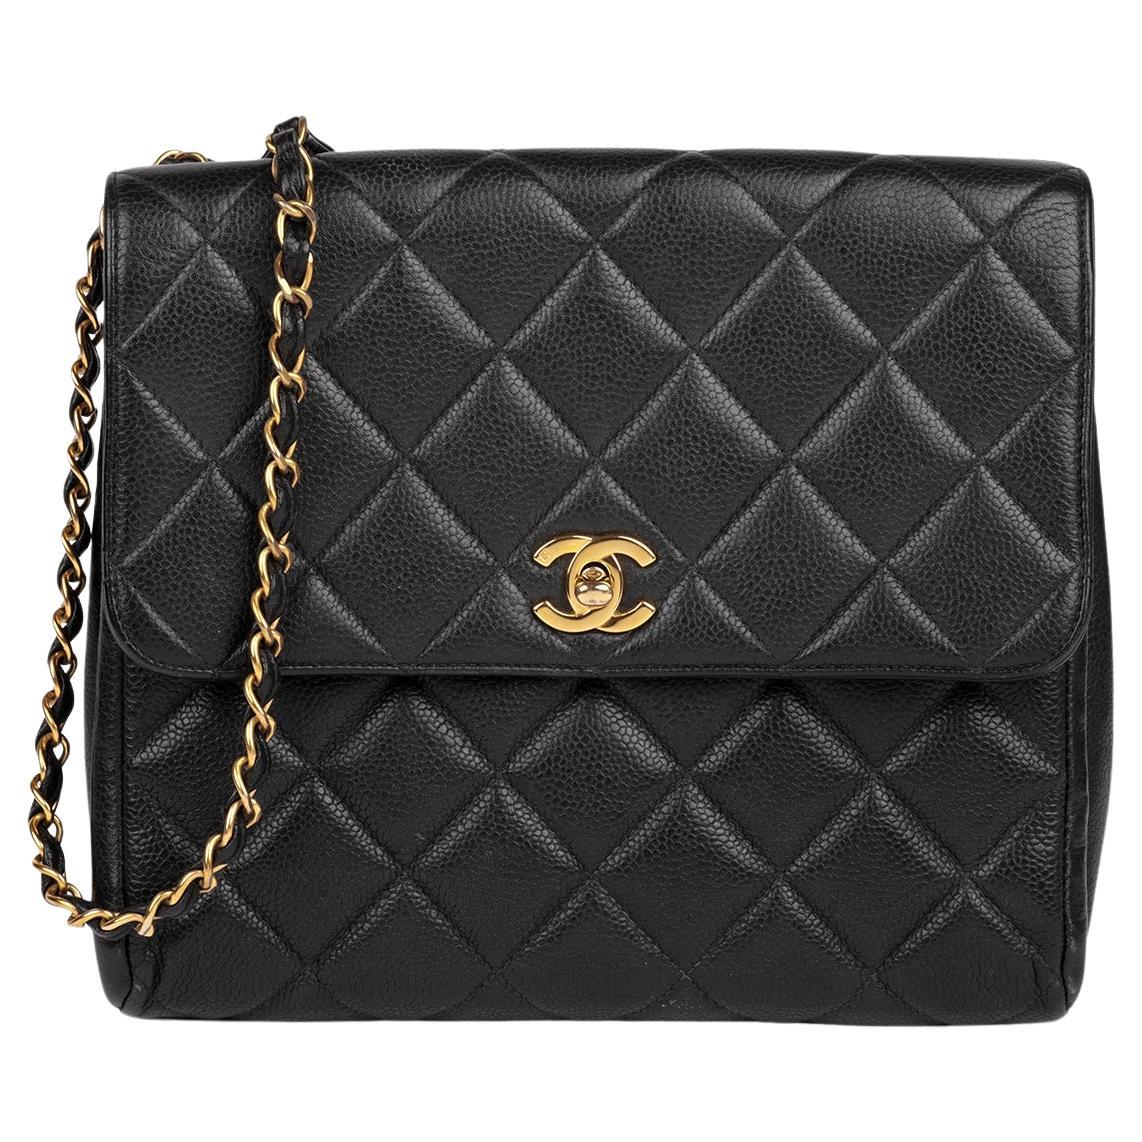 Chanel Black Quilted Caviar Leather Vintage Small Classic Single Flap Bag en vente